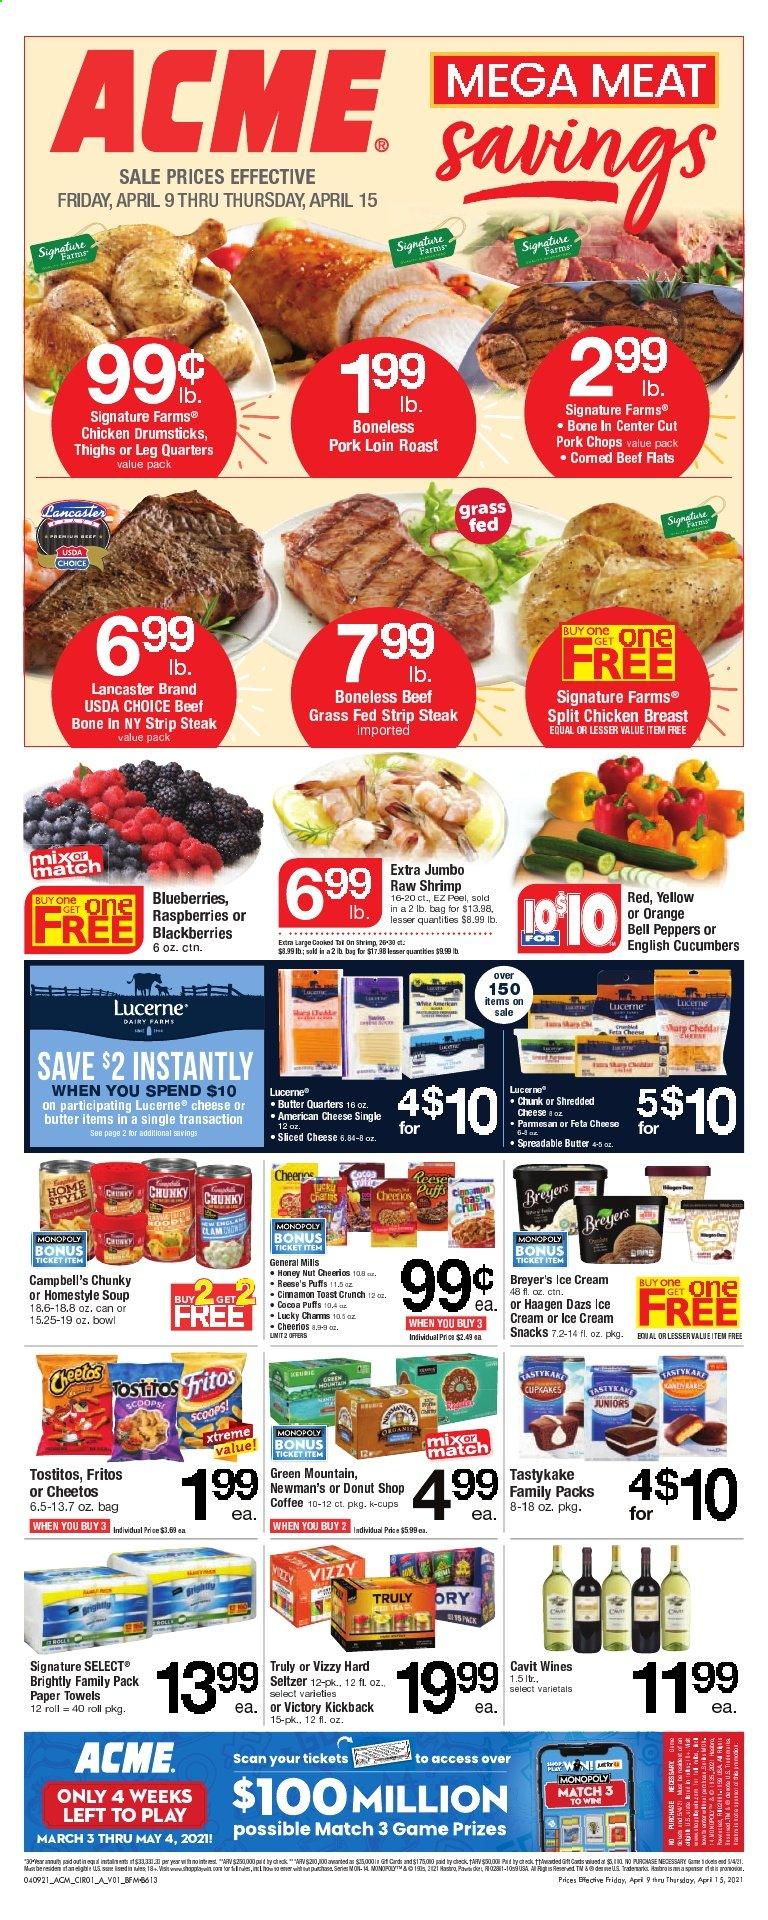 thumbnail - ACME Flyer - 04/09/2021 - 04/15/2021 - Sales products - puffs, bell peppers, cucumber, blueberries, raspberries, oranges, shrimps, Campbell's, soup, american cheese, shredded cheese, sliced cheese, feta, butter, spreadable butter, ice cream, Reese's, Häagen-Dazs, snack, Fritos, Cheetos, Tostitos, cocoa, Cheerios, seltzer water, coffee, coffee capsules, K-Cups, Green Mountain, Hard Seltzer, TRULY, chicken breasts, chicken drumsticks, beef meat, steak, striploin steak, pork chops, pork loin, pork meat, kitchen towels, paper towels, bowl, Sharp, beef bone, bag, peppers. Page 1.